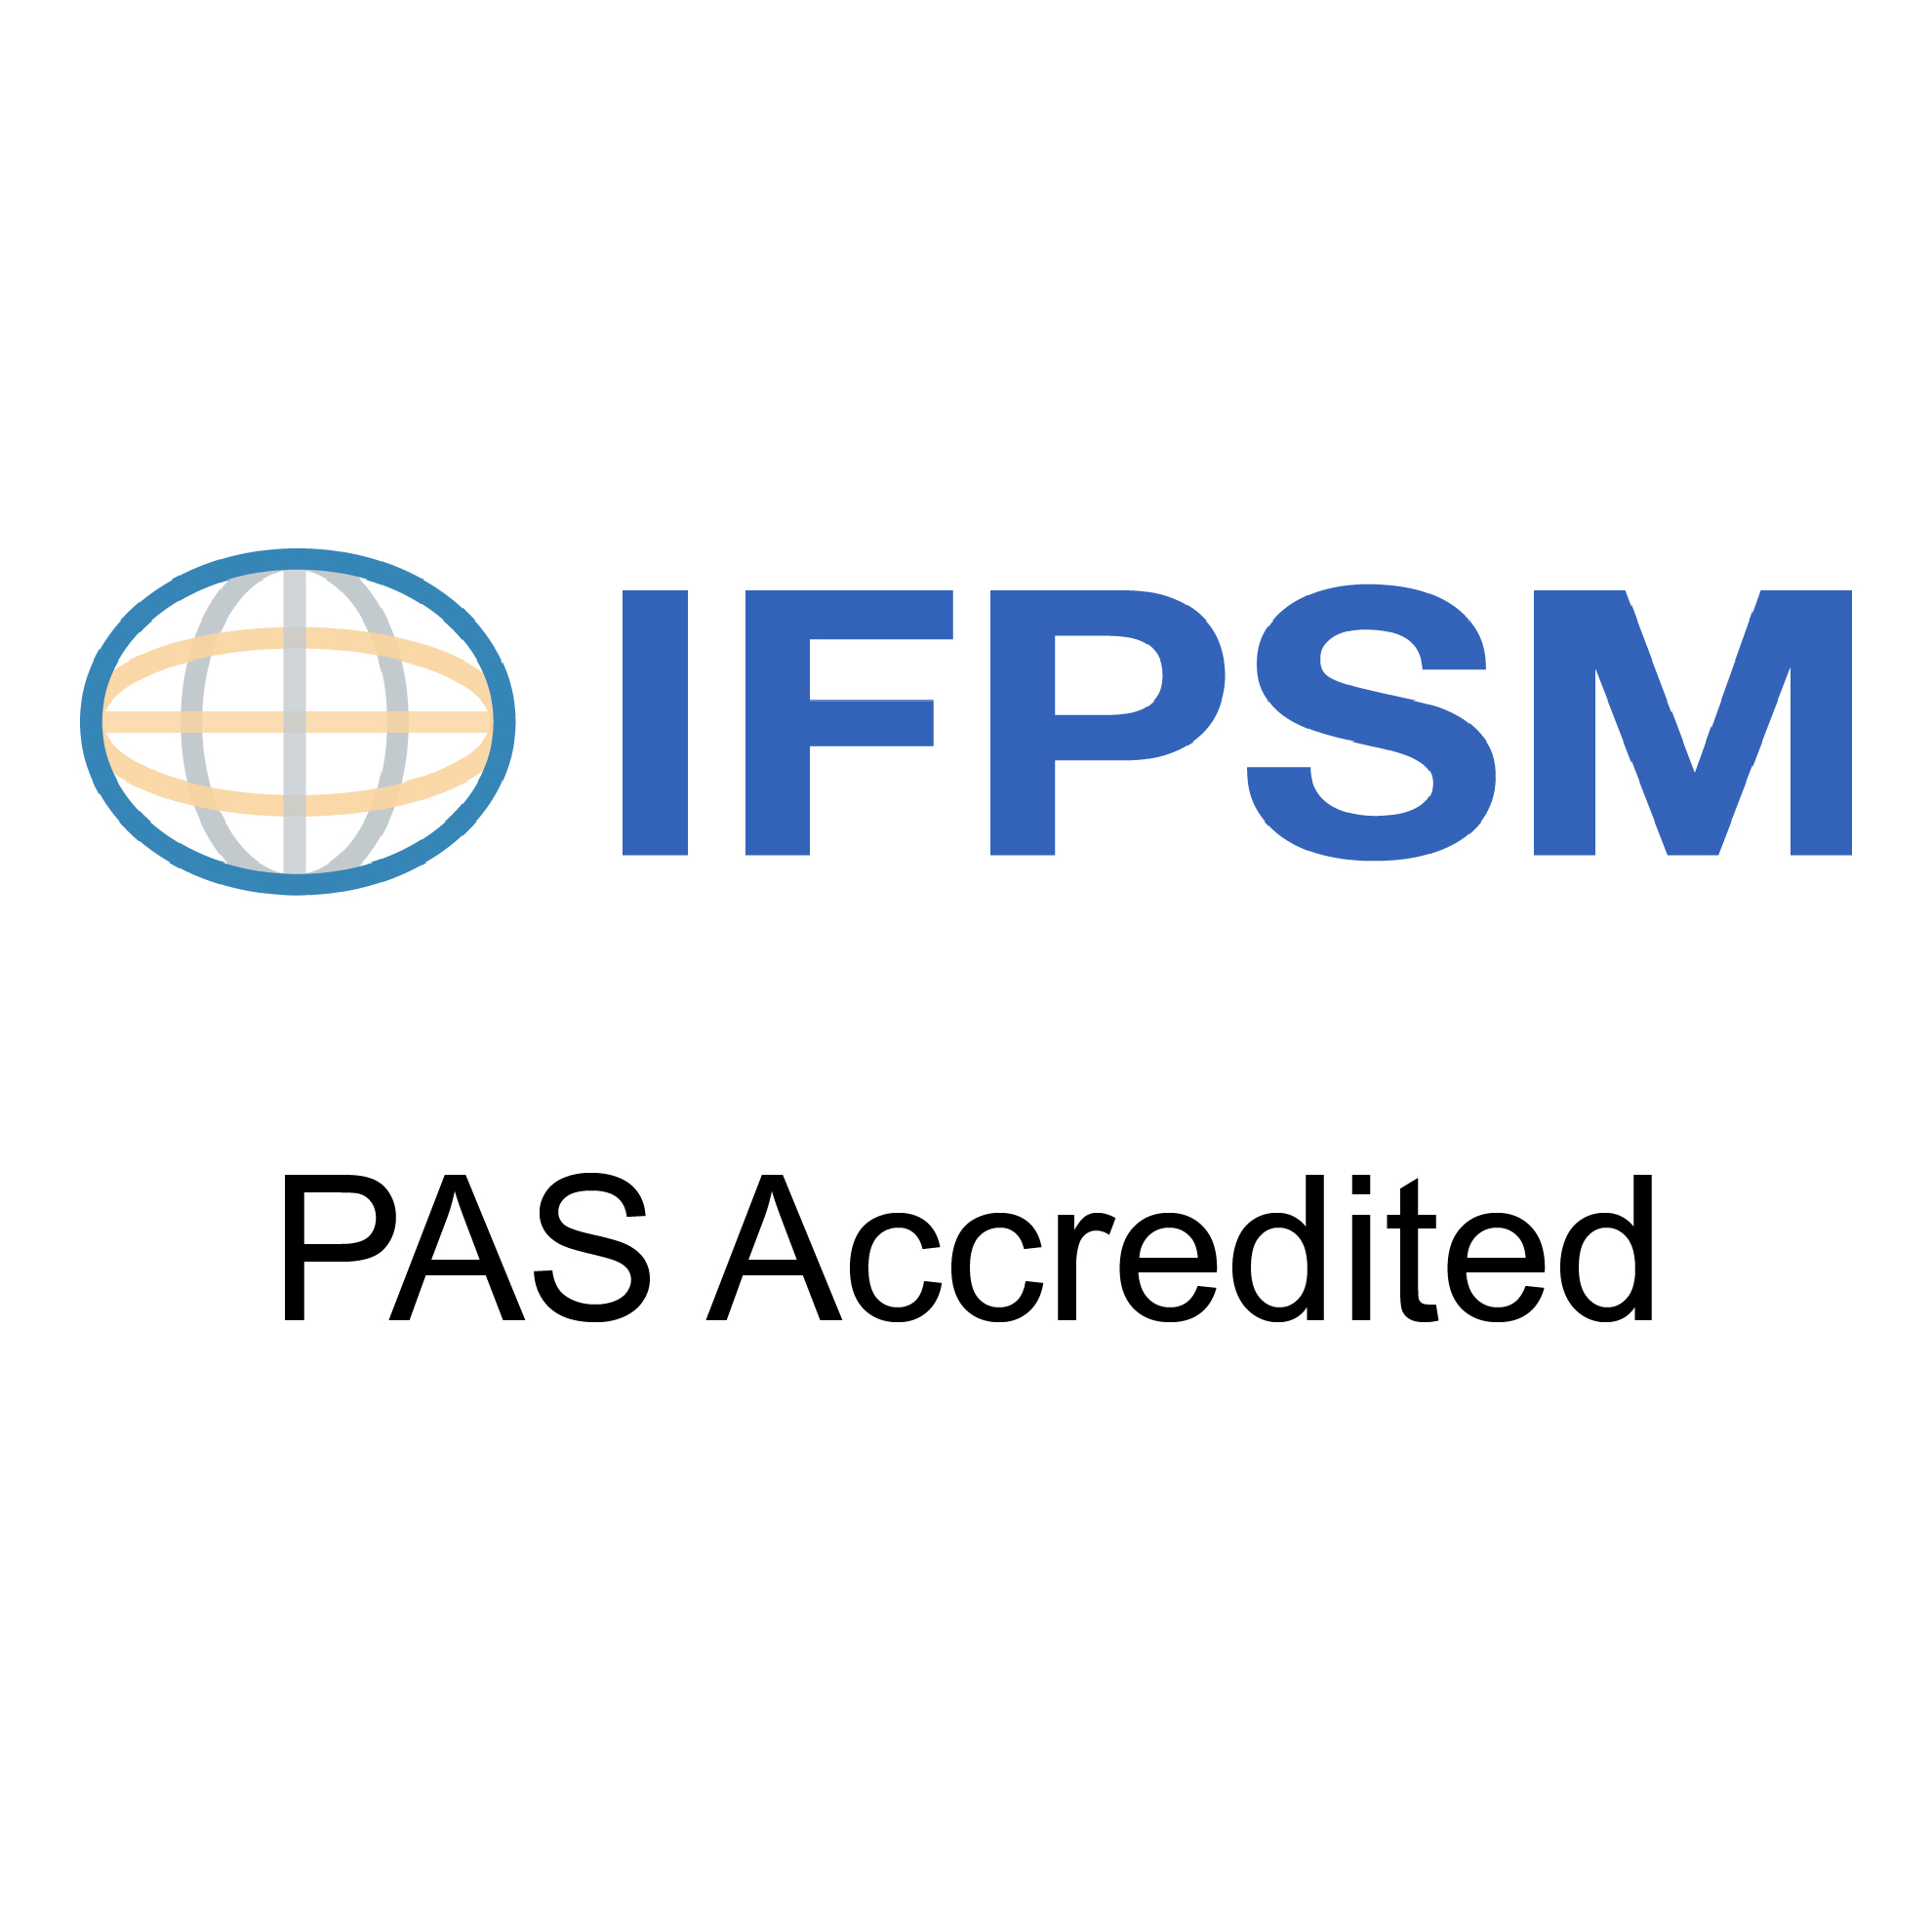 IFPSM-New-logo-with-words-high-resolution-PAS-Accredited-1